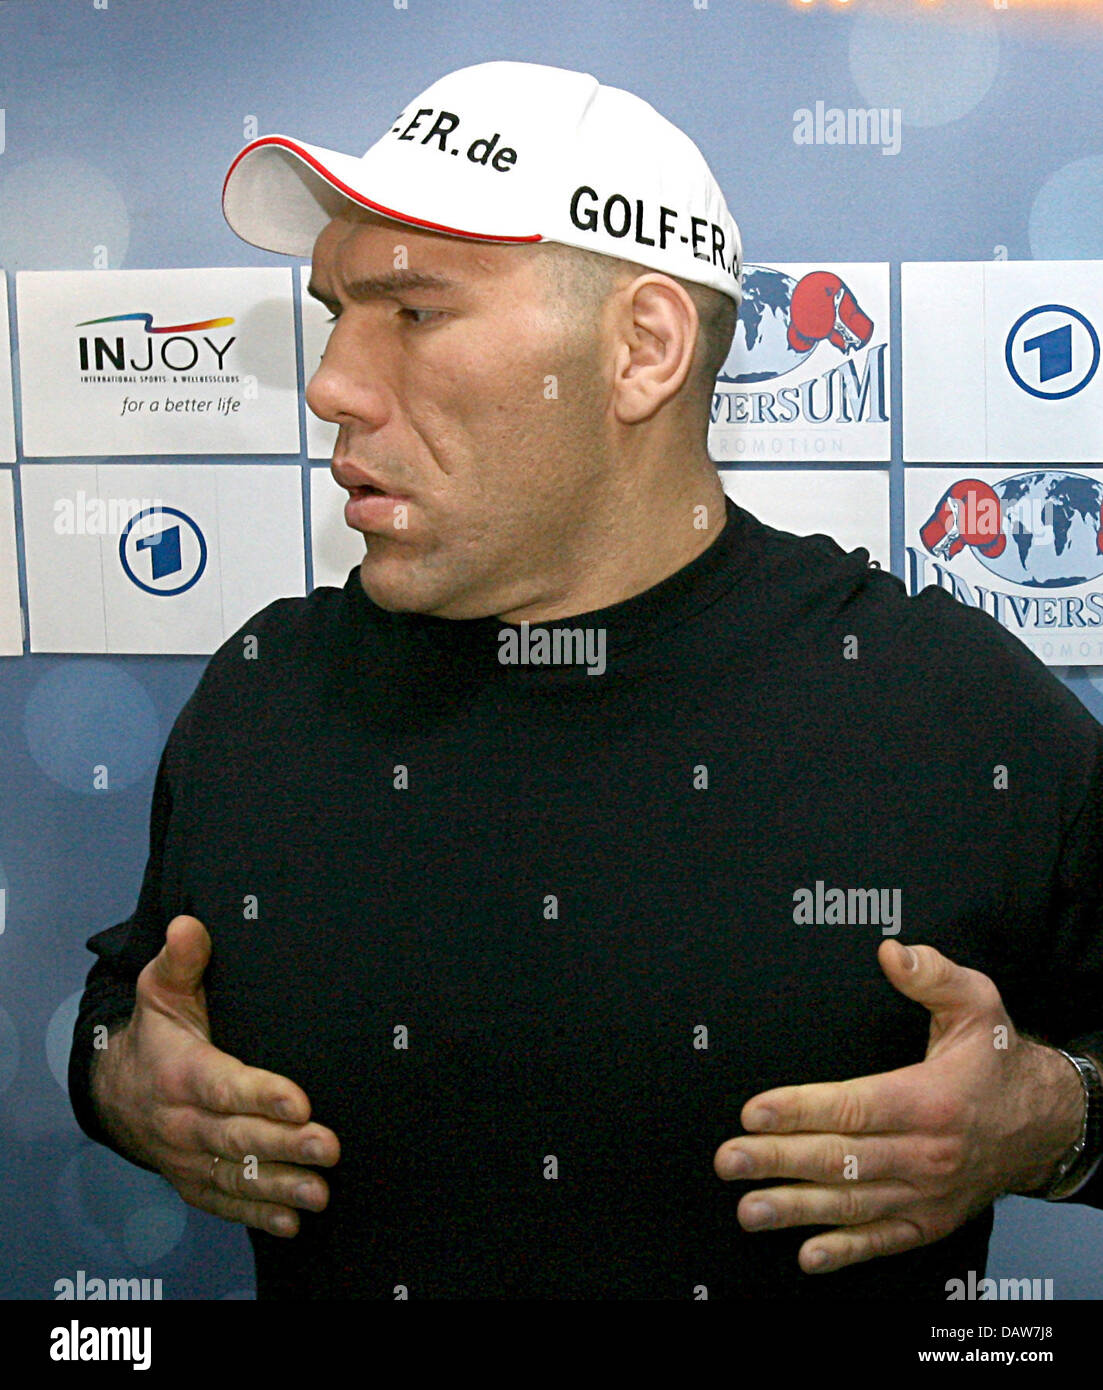 Heivy weight boxer Nikolai Valuev from Russia poses at the Porsche Arena in Stuttgart, Germany, Tuesday, 6 March 2007. Reigning WBA World Champion Valuev wants to defend his title against Uzbek contender Chagaev in a fight on 14th April in Stuttgart. Photo: Norbert Foersterling Stock Photo